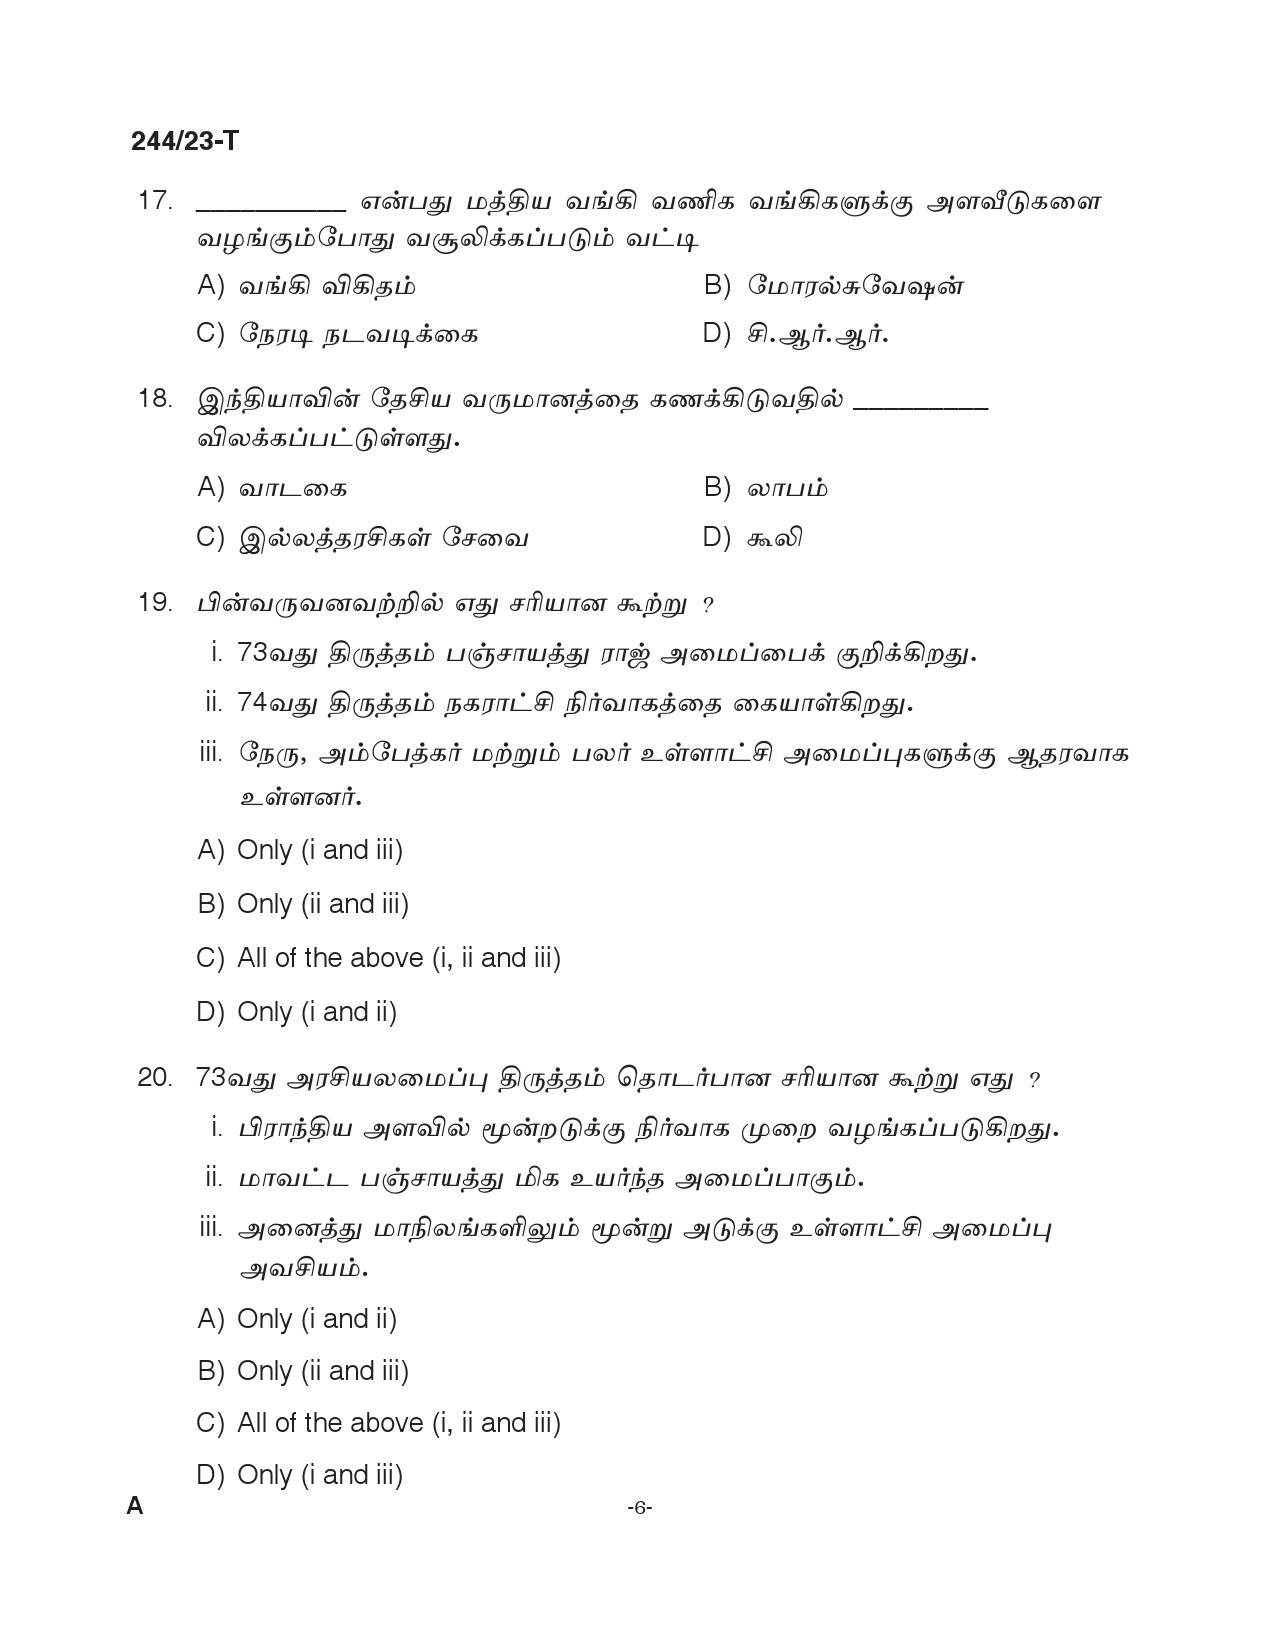 KPSC Fire and Rescue Officer Trainee Tamil Exam 2023 Code 2442023 T 5